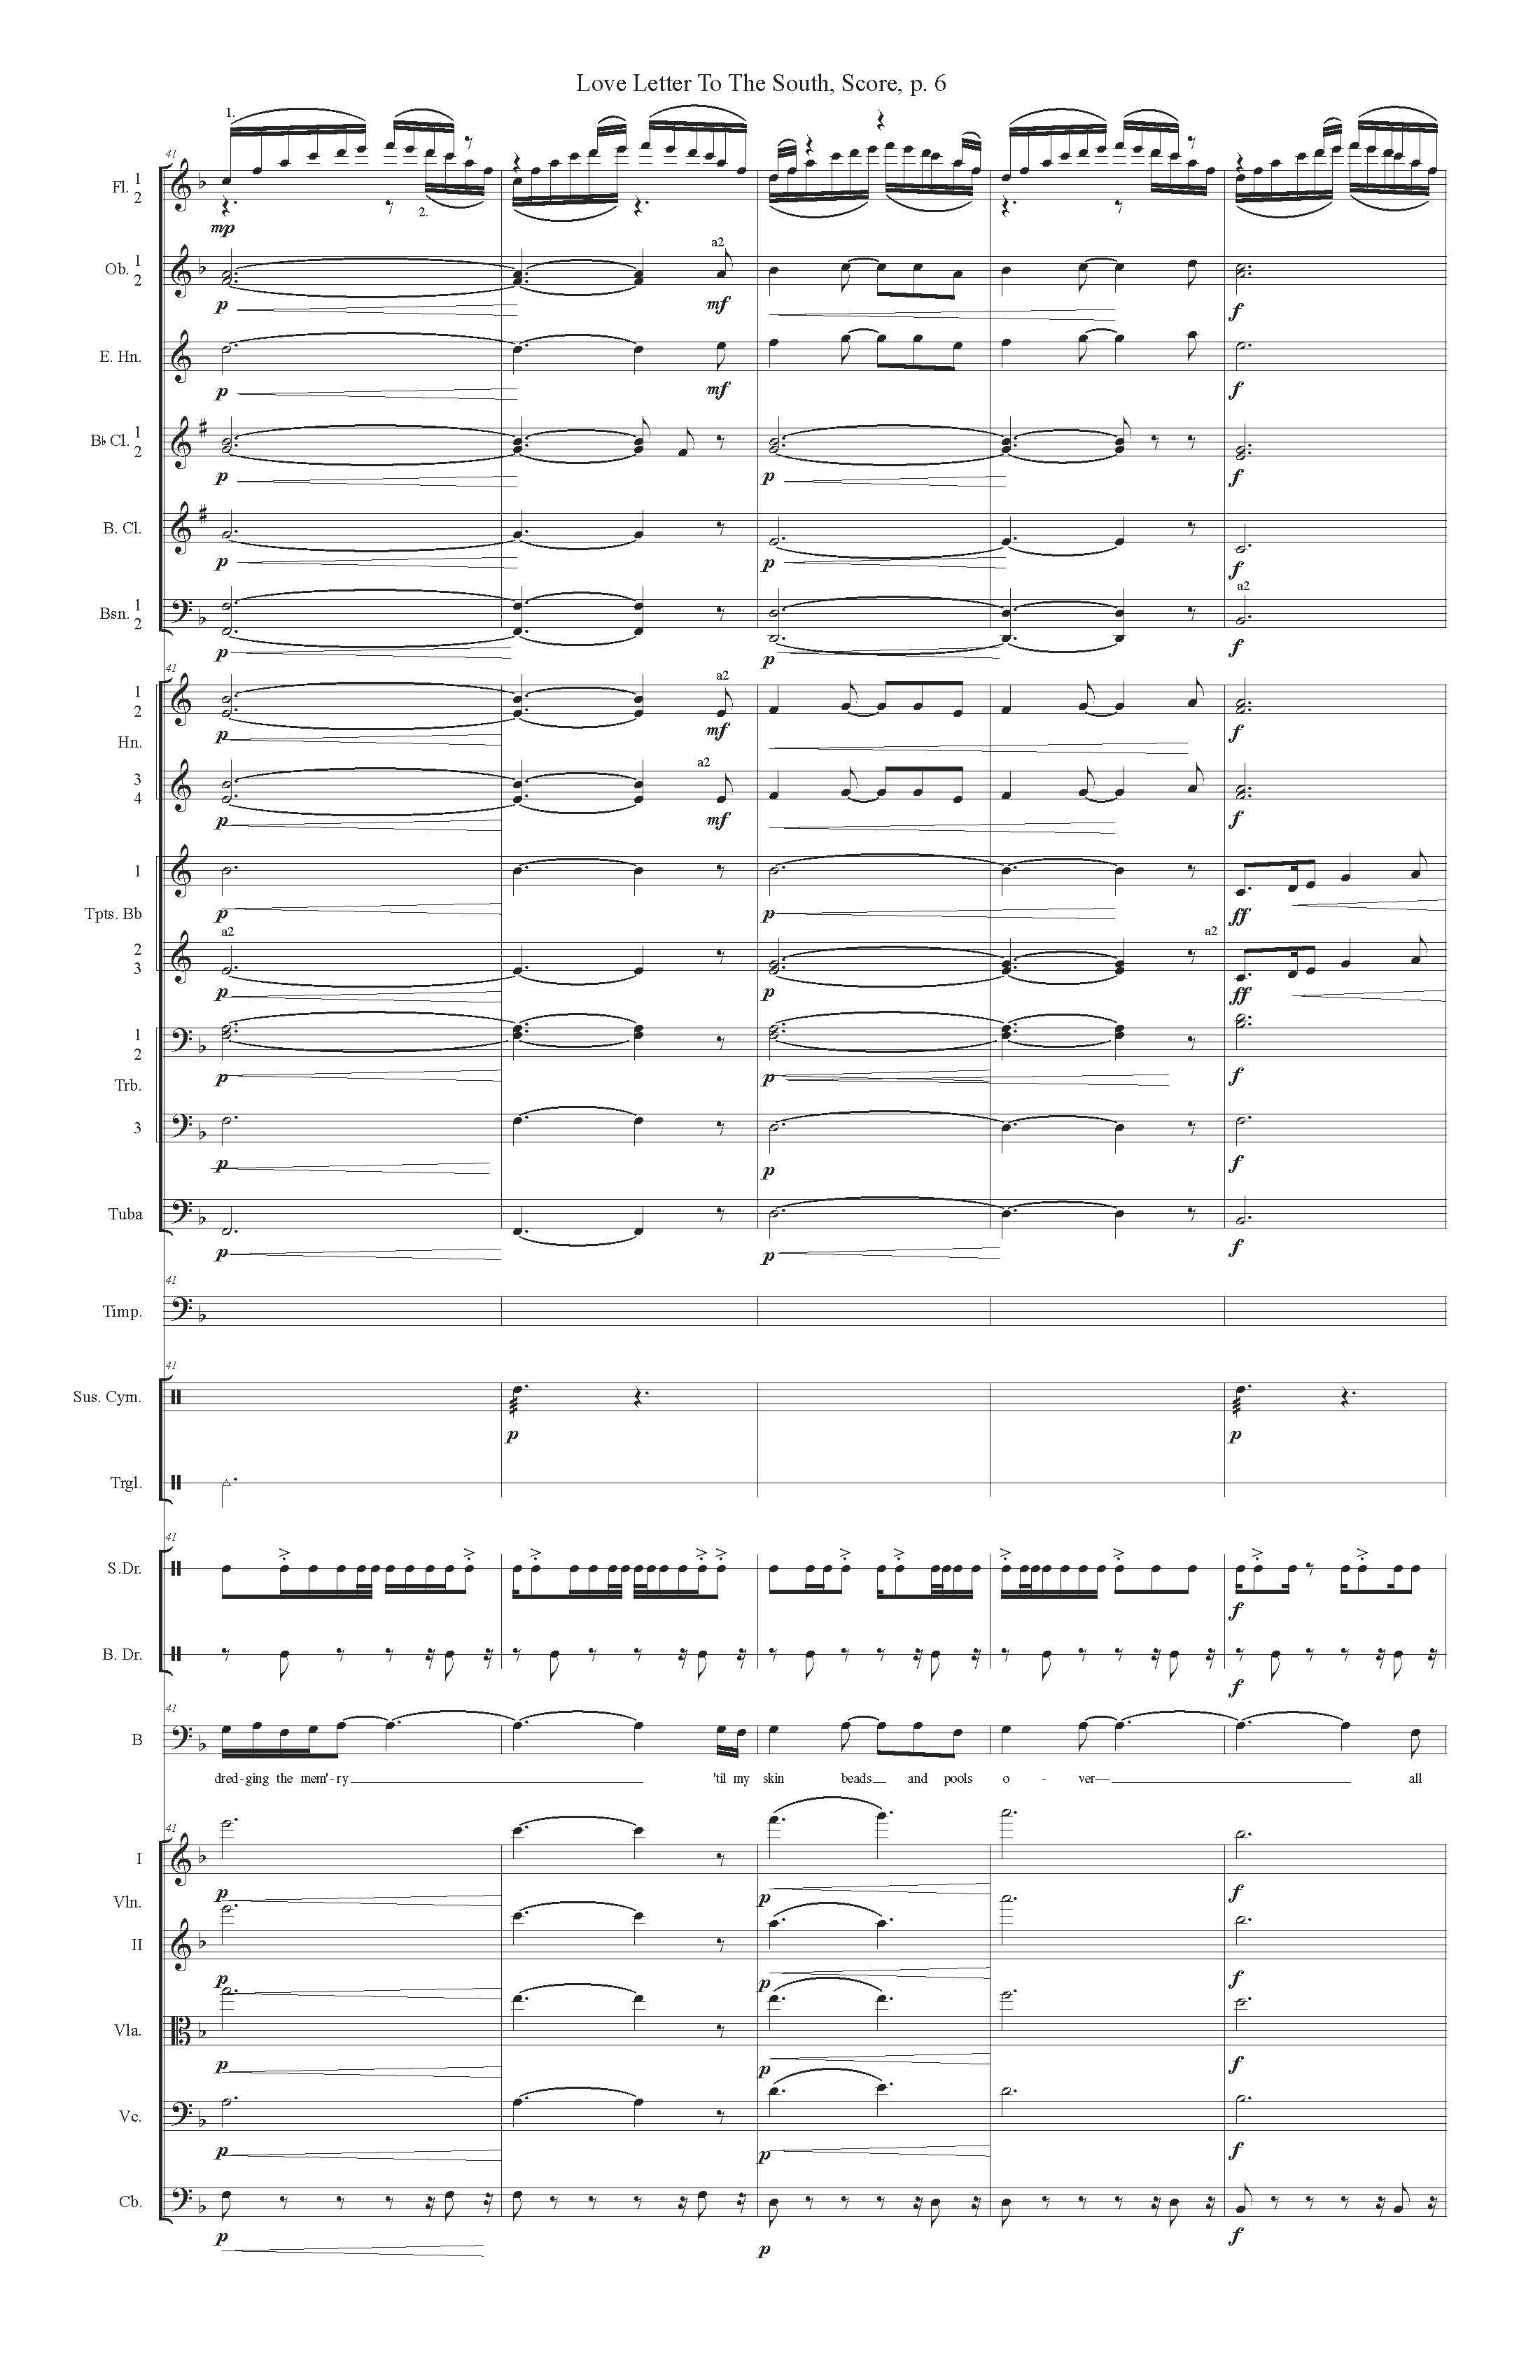 LOVE LETTER TO THE SOUTH ORCH - Score_Page_06.jpg